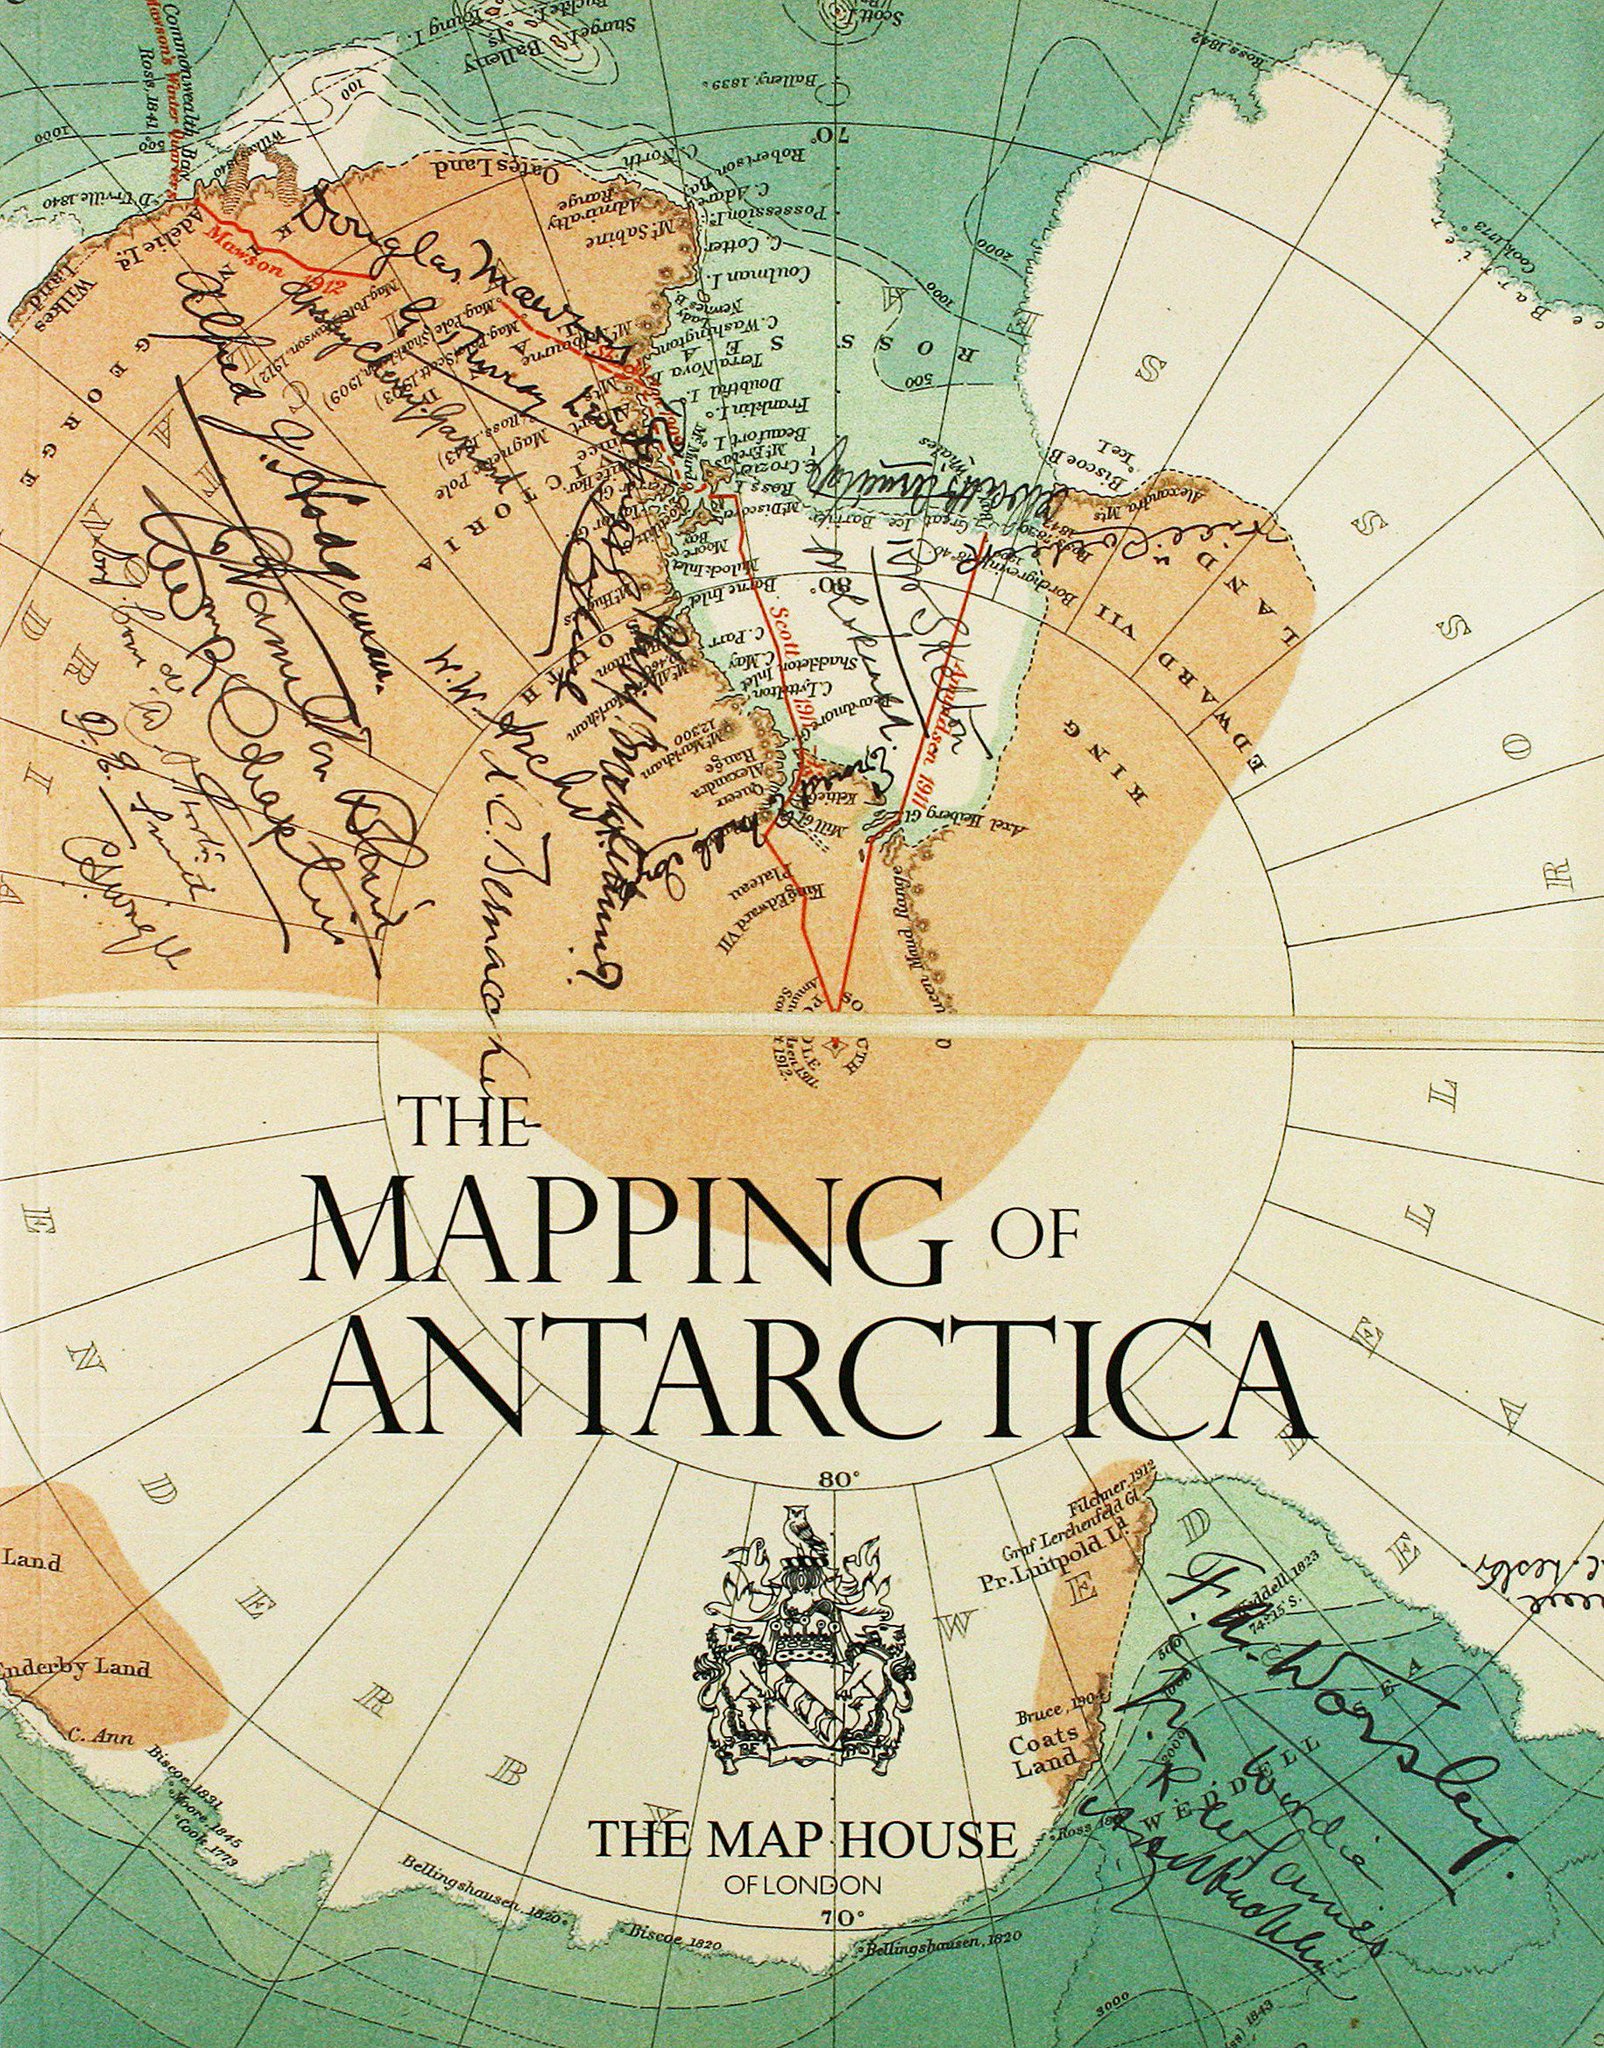 The Map Houseさんのツイート Otd 1911 Norwegian Explorer Roald Amundsen And His Team Reached The South Pole This Map Of Antarctica Published By The Rgs Ibg In 1913 Shows His Record Breaking Route And